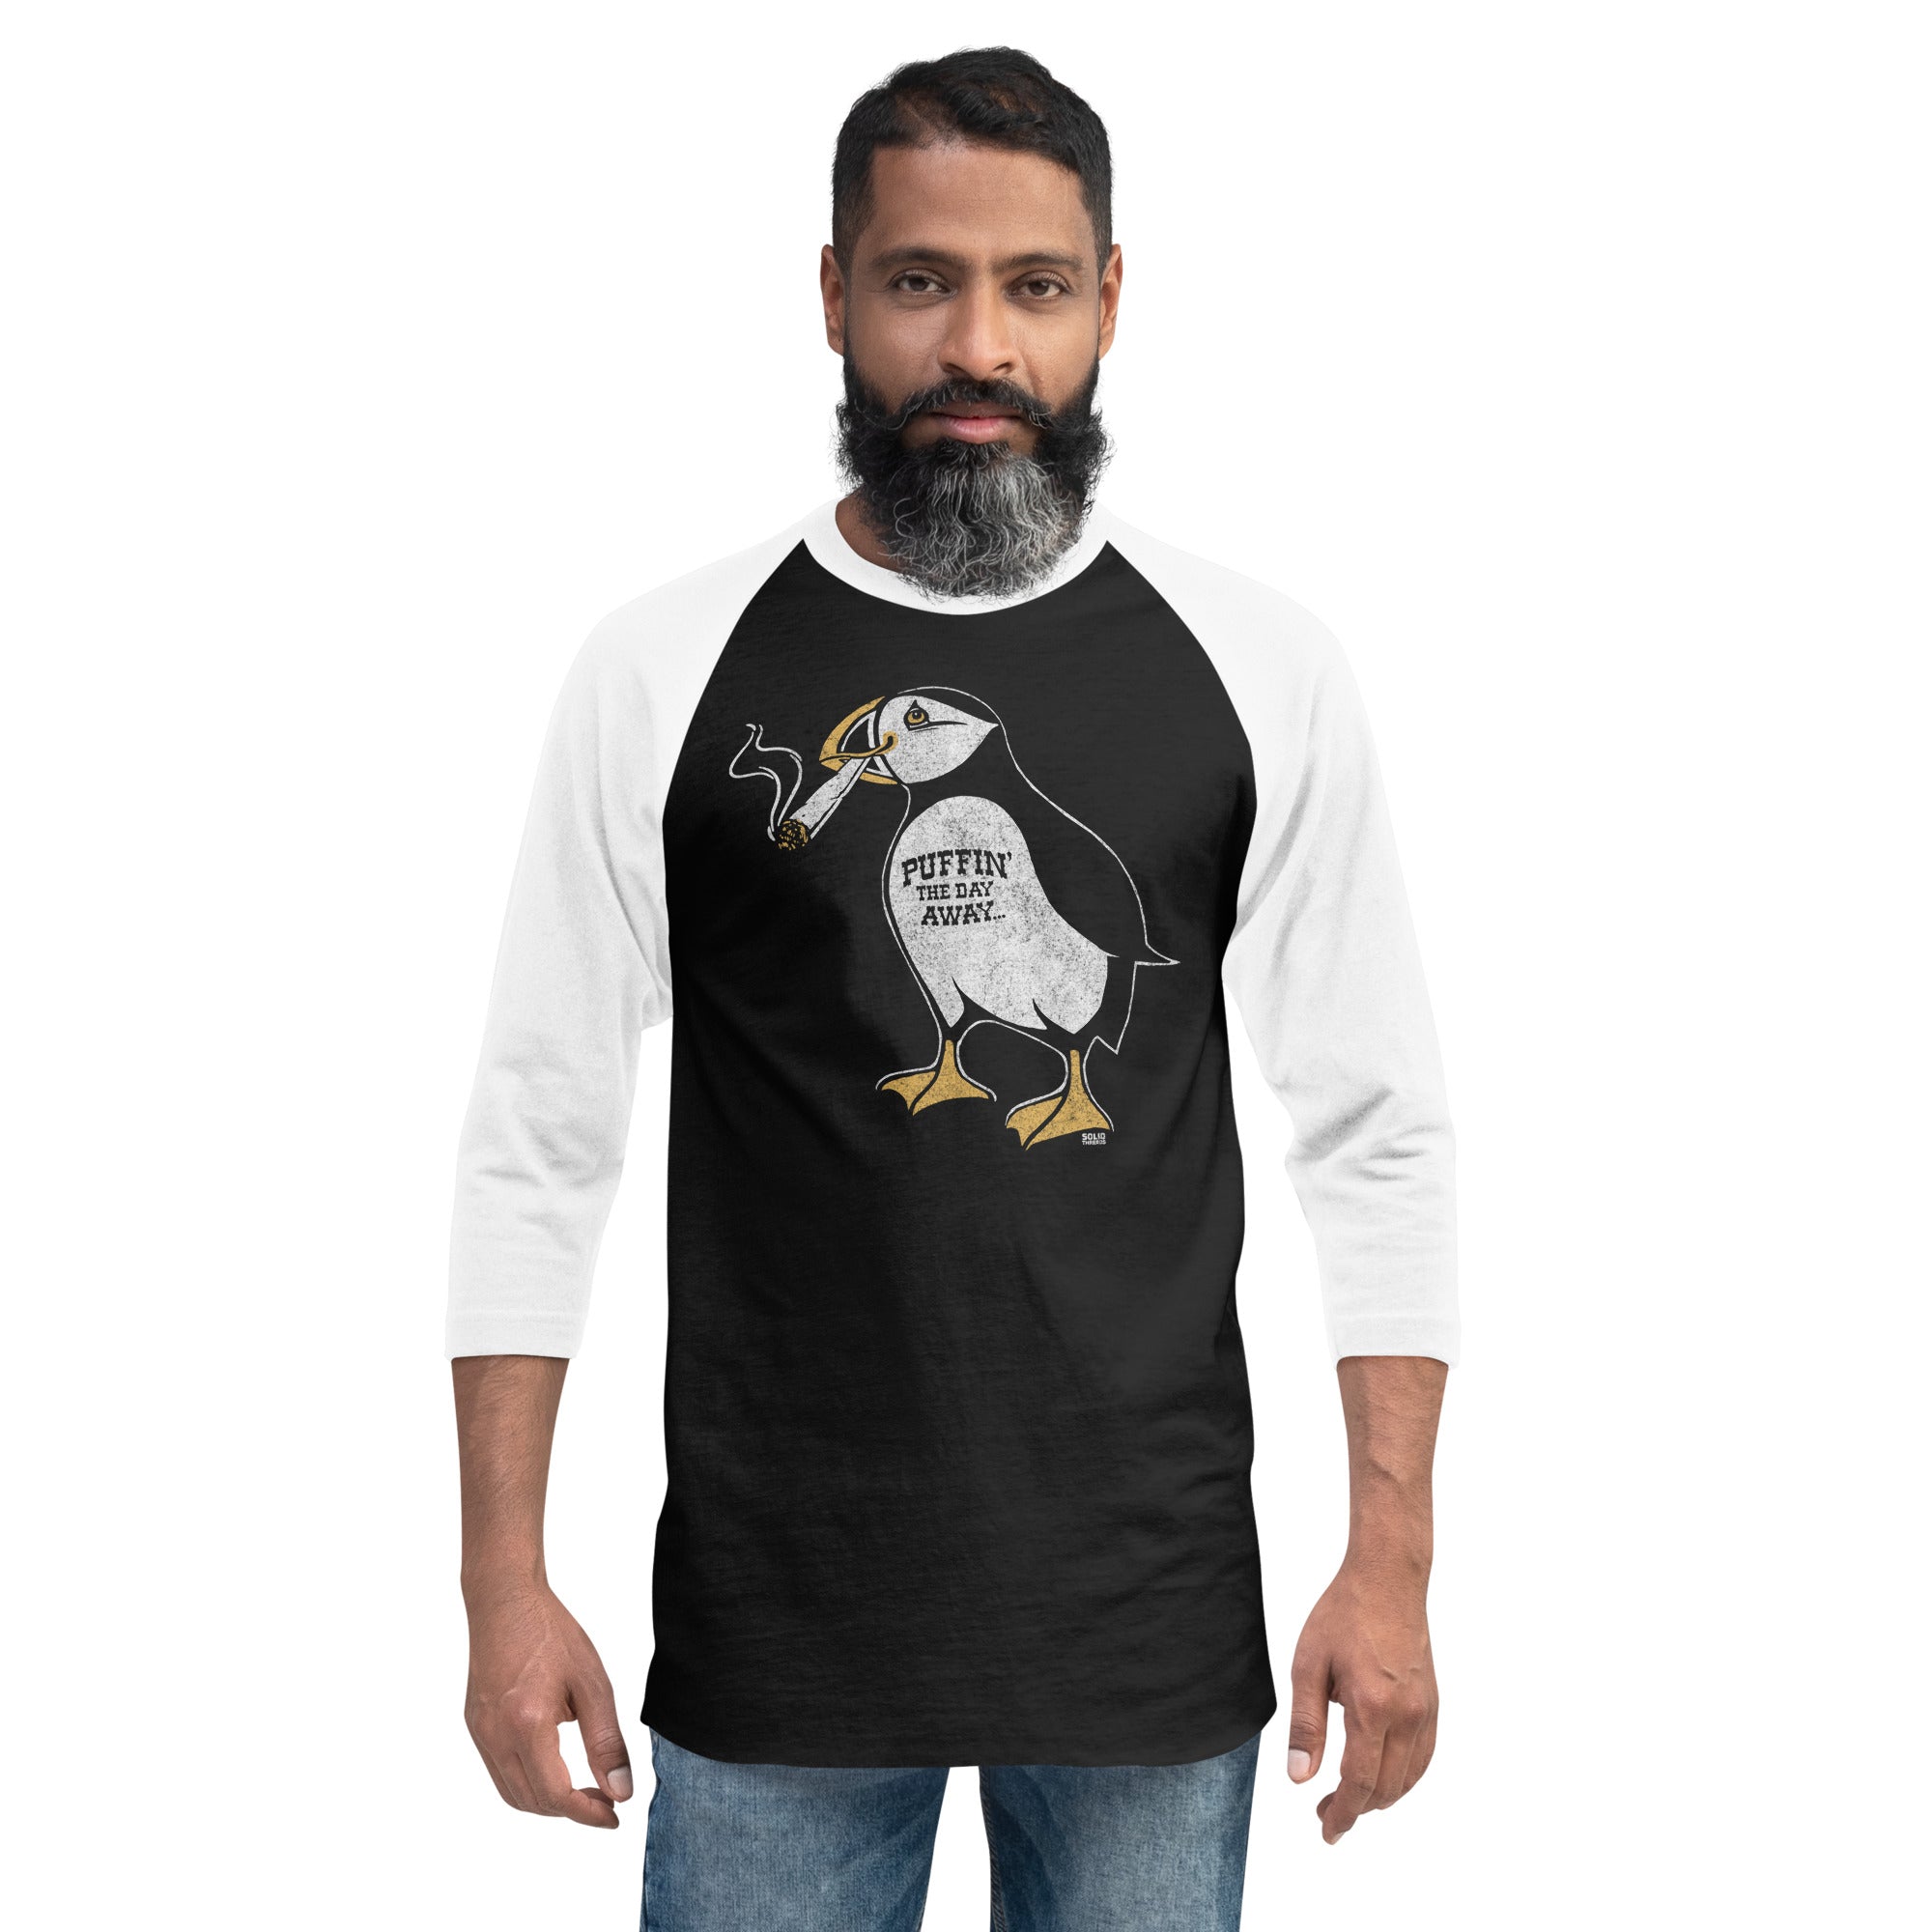 Puffin Away Retro Weed Graphic Raglan Tee | Funny Stoner Baseball T-shirt on Male Model | Solid Threads